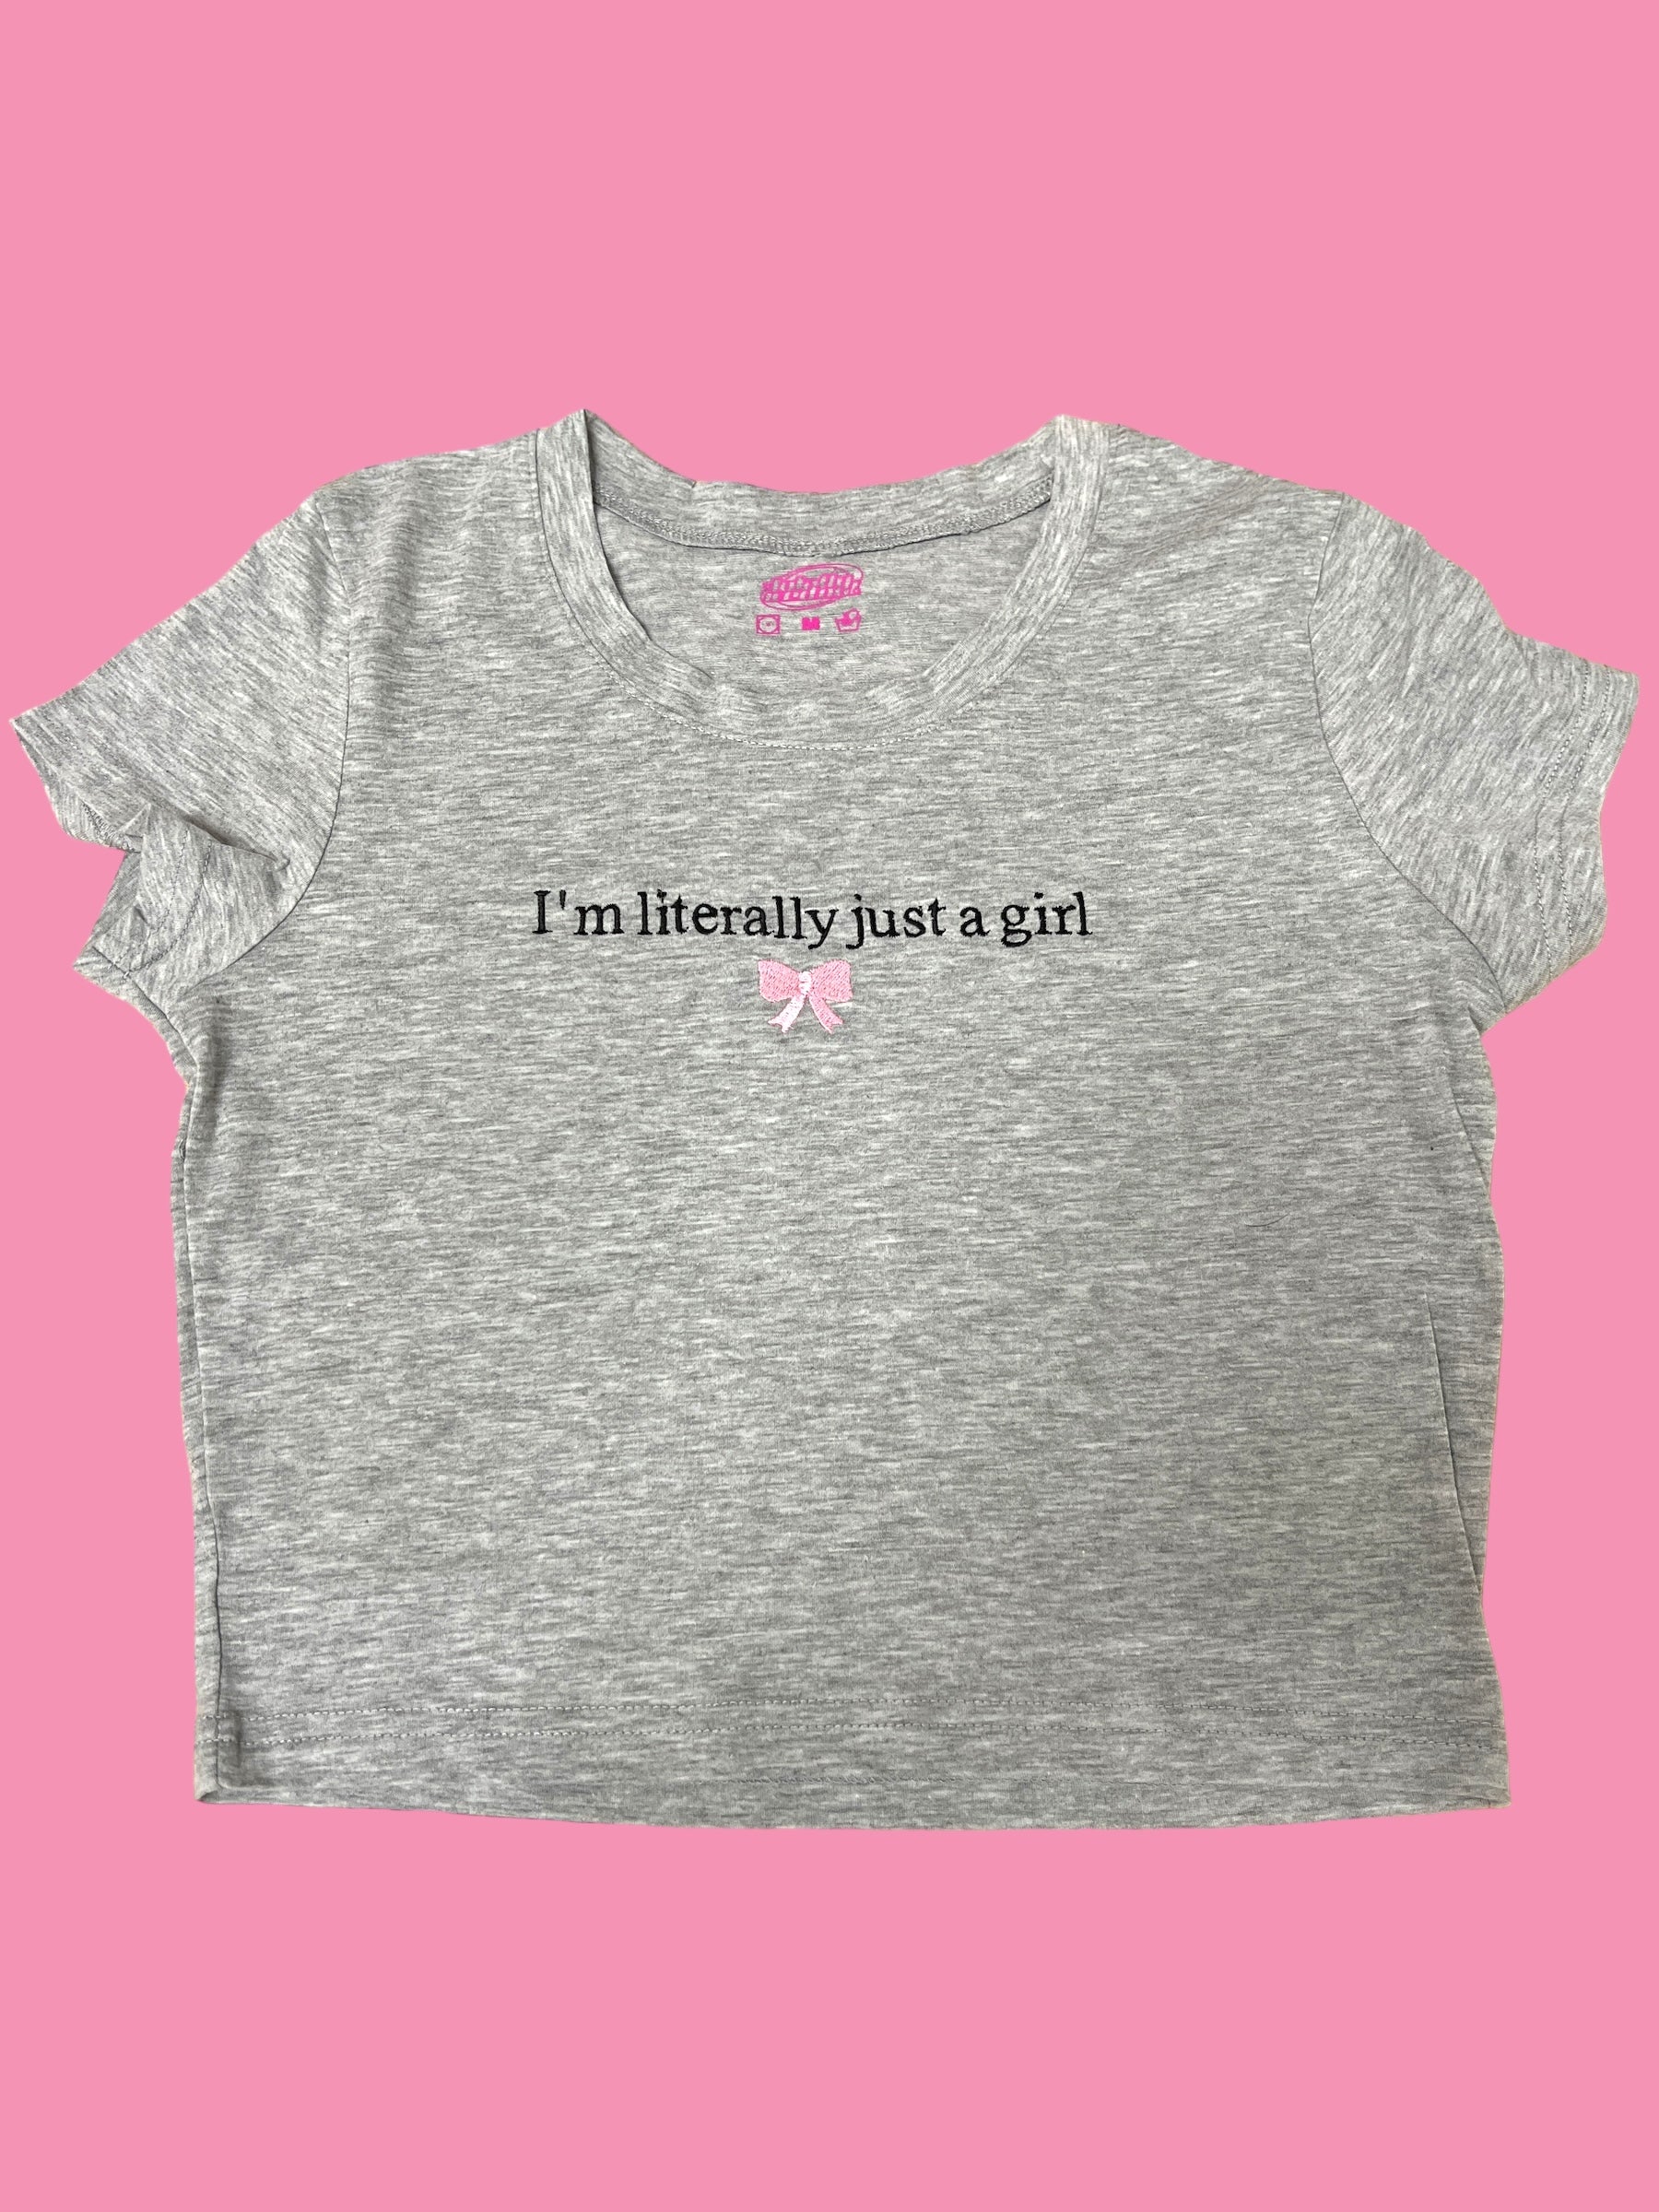 a t - shirt that says i'm literally just a girl